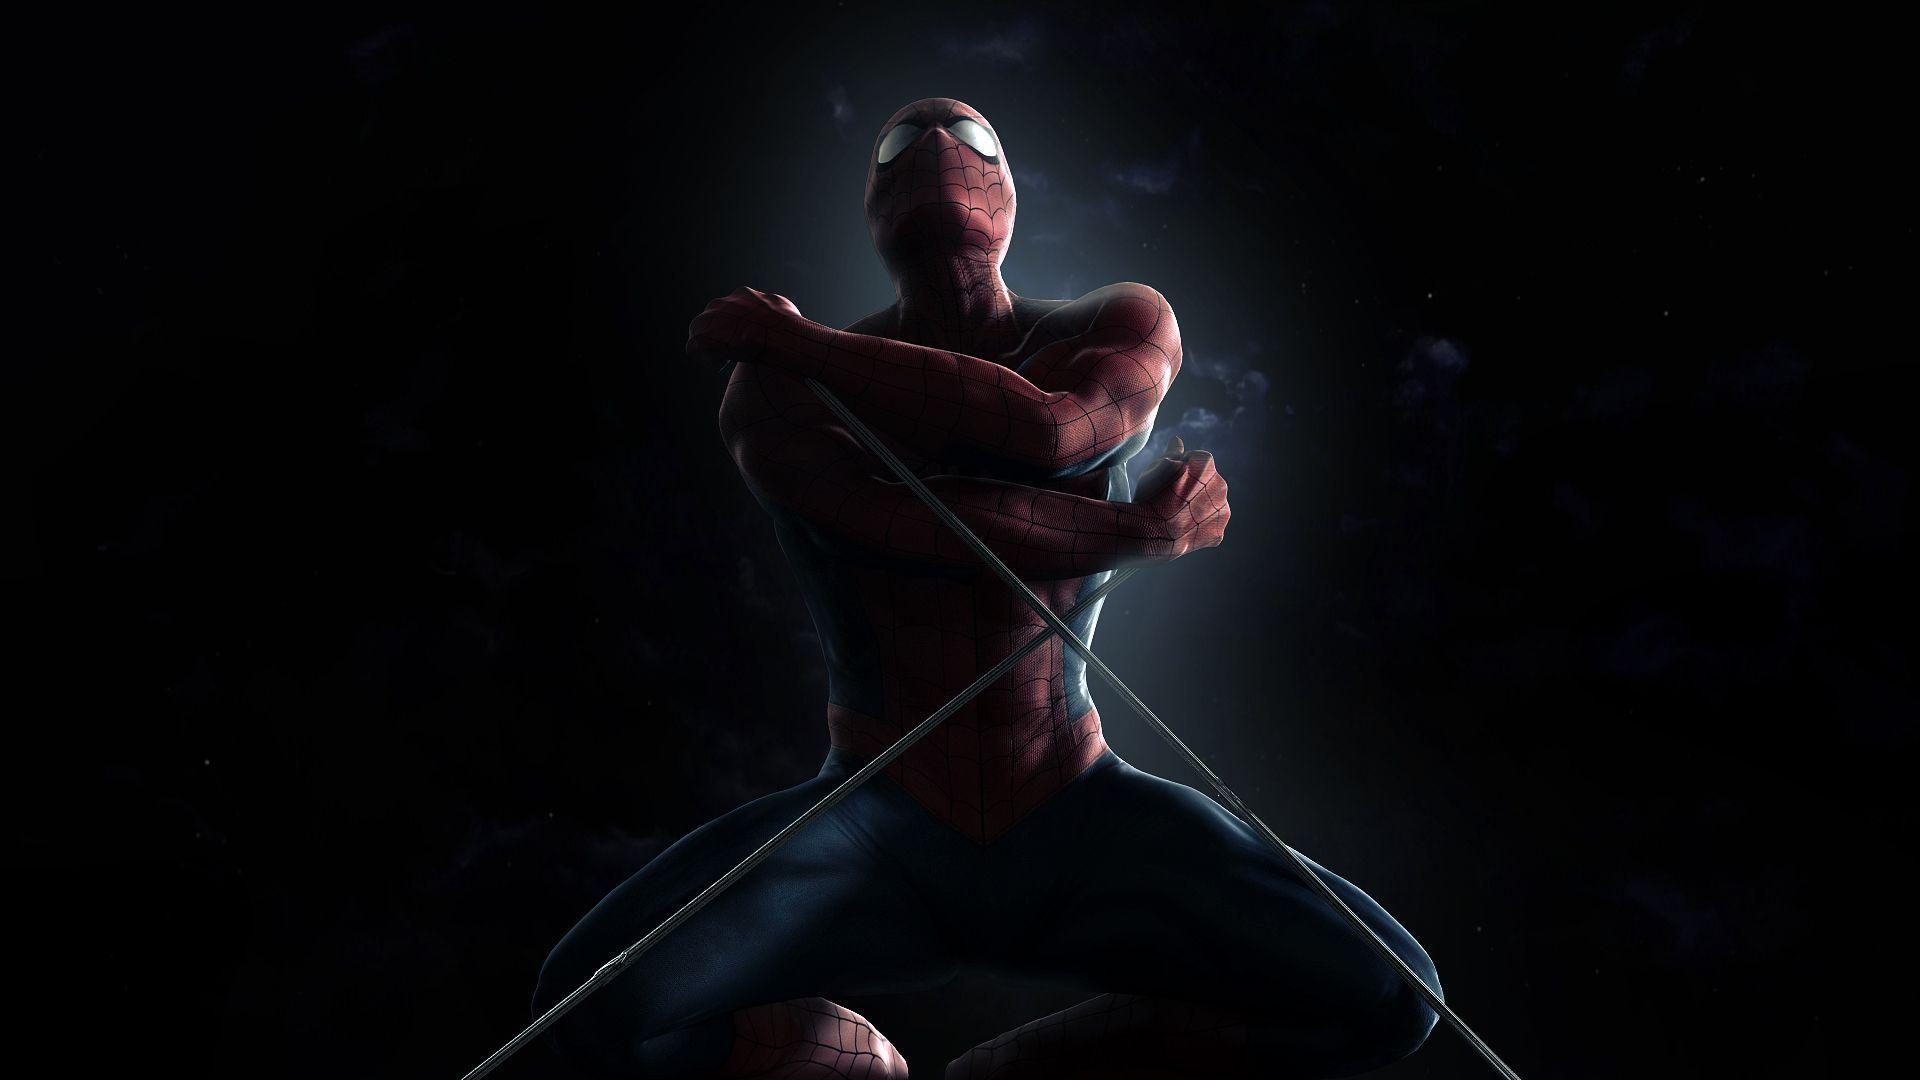 The Amazing SpiderMan Wallpaper HD Facebook Cover Photo 1920